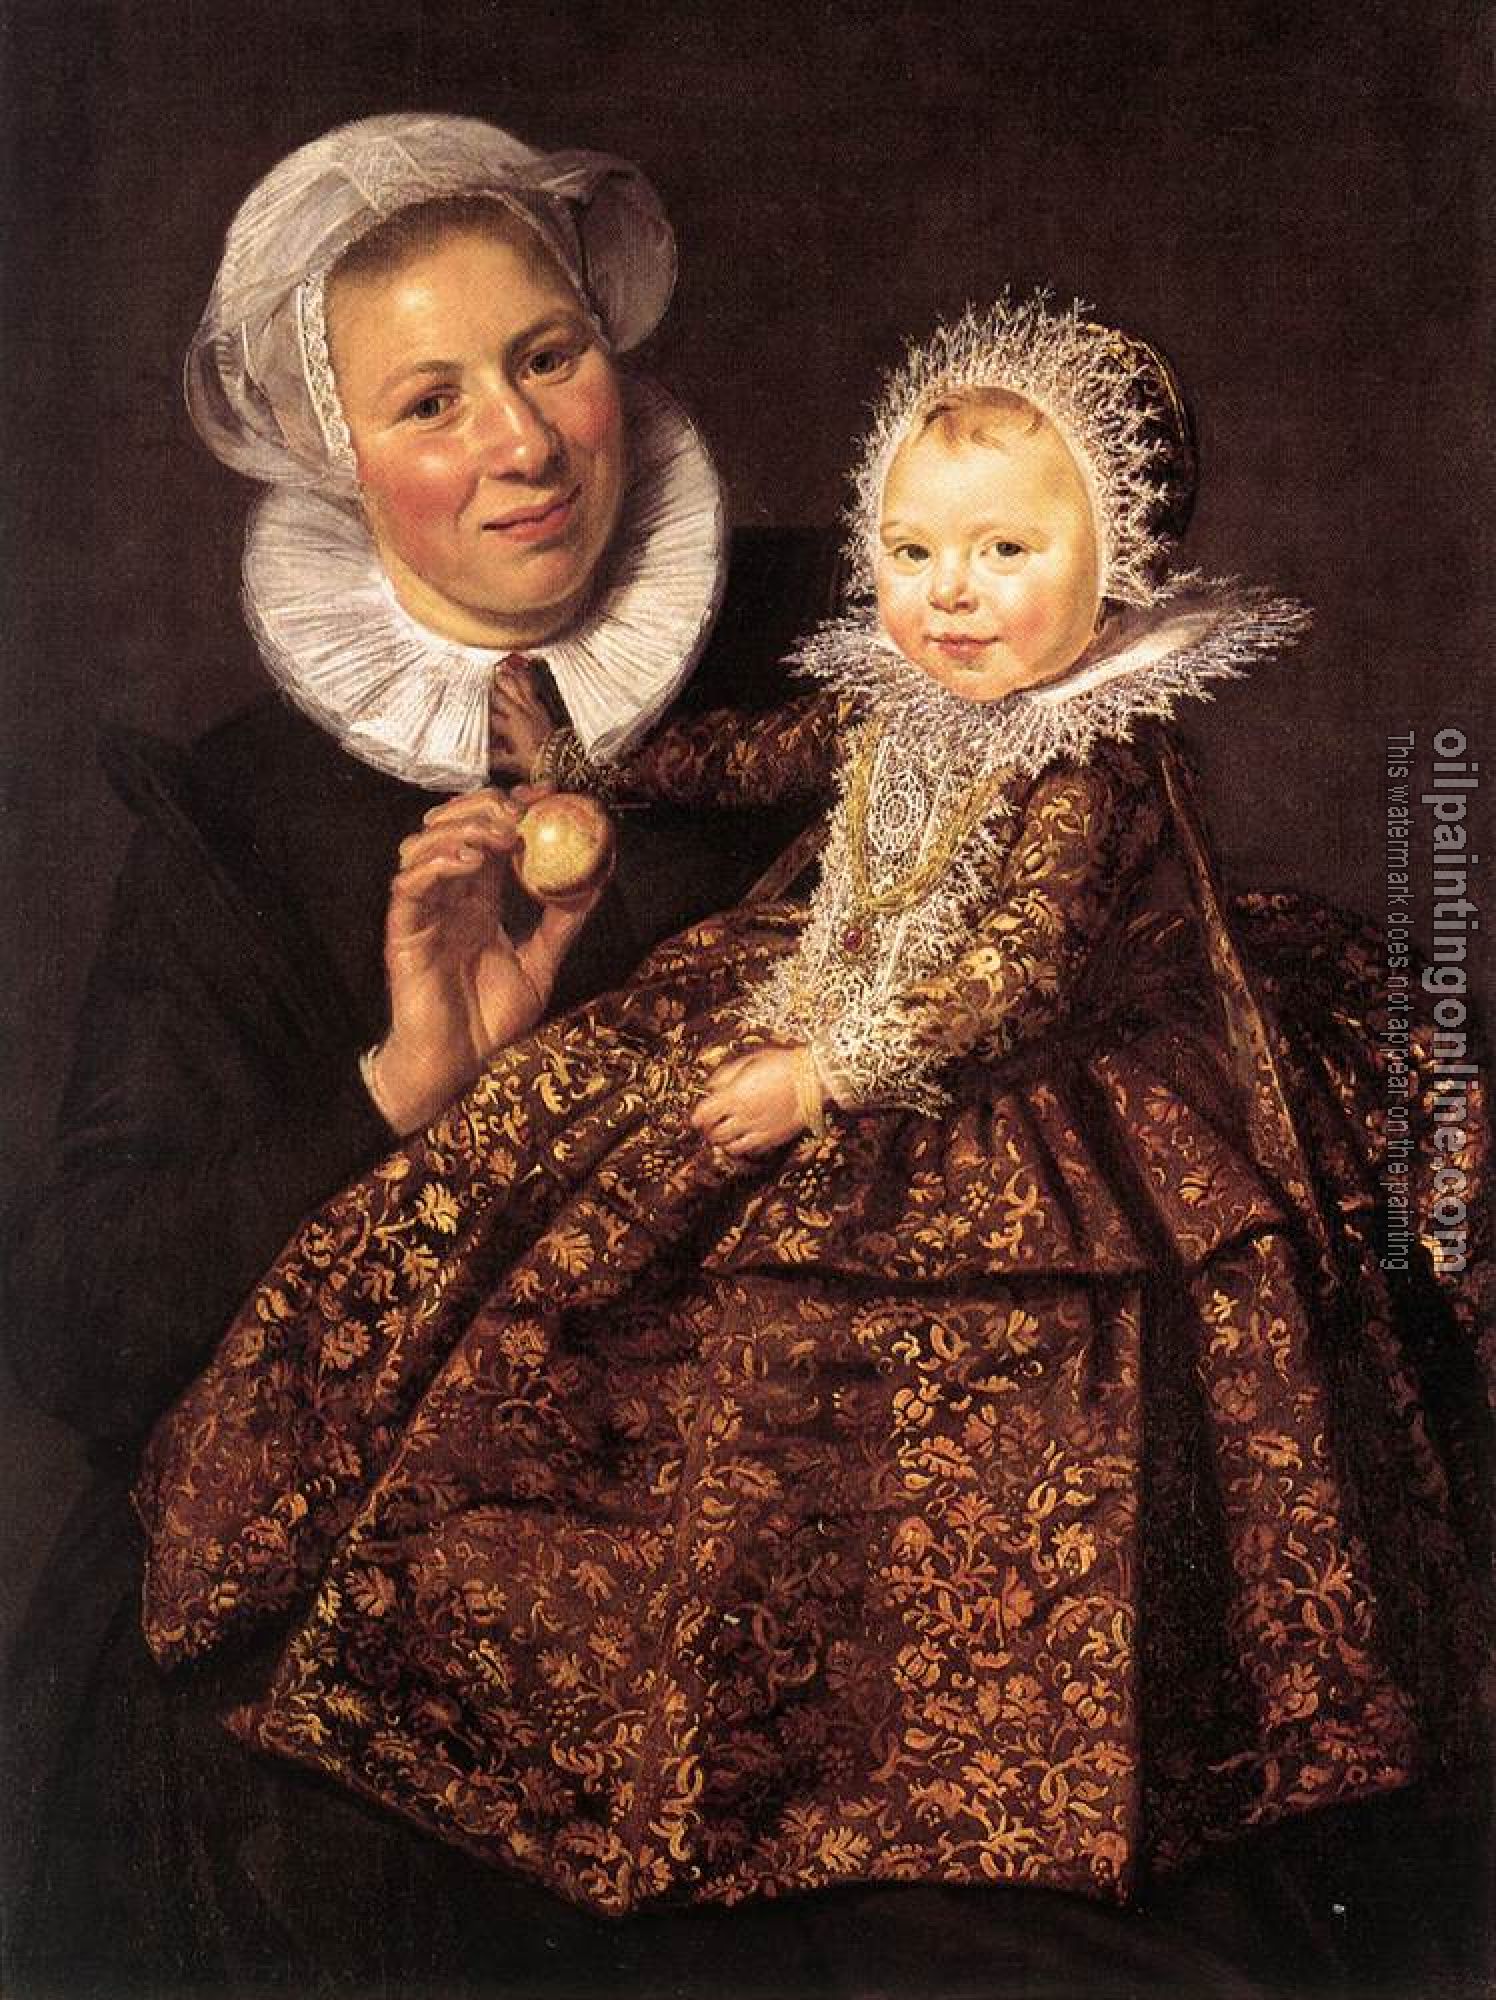 Hals, Frans - Catharina Hooft with her Nurse